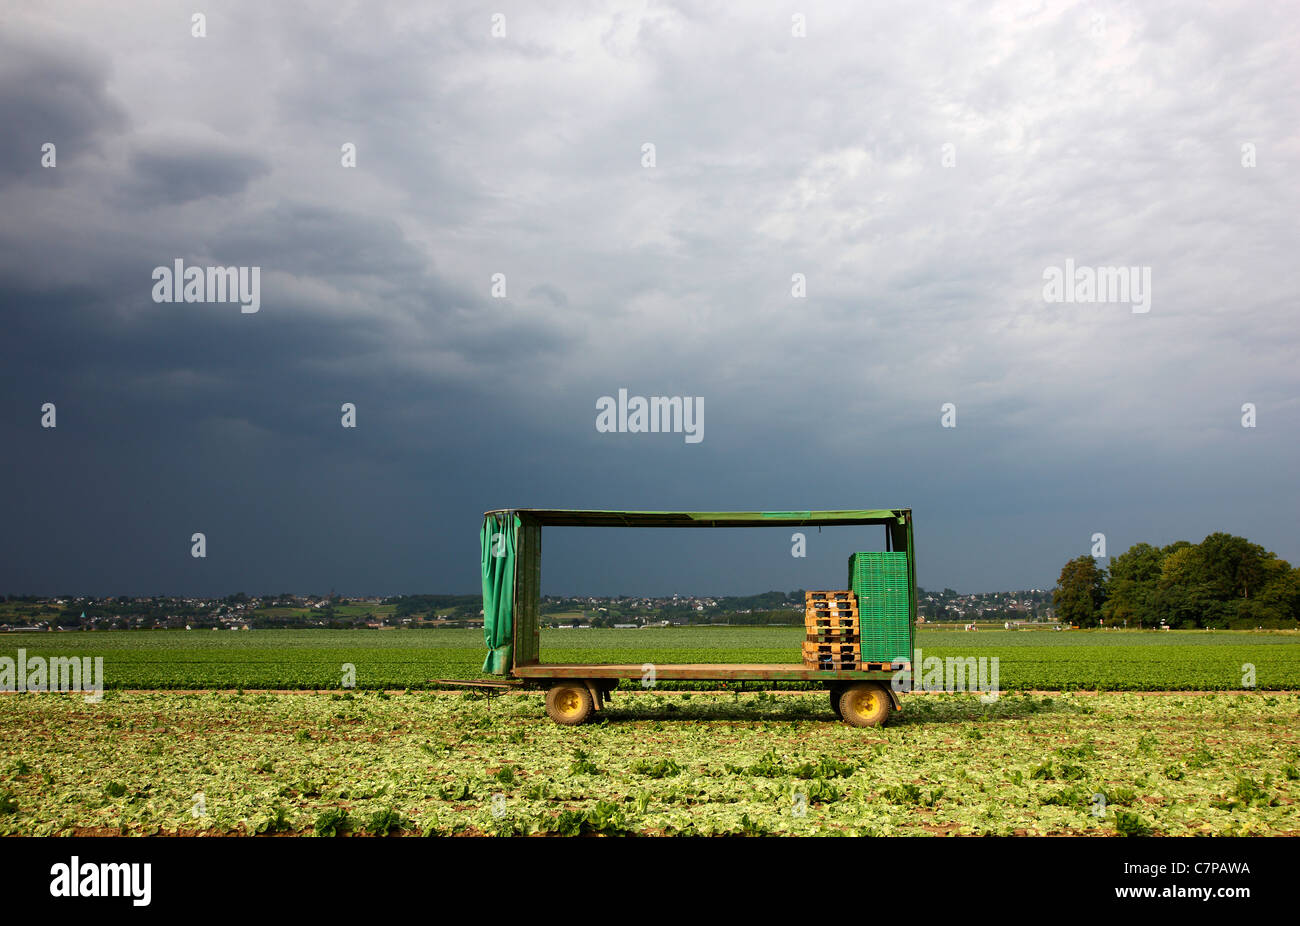 Harvested field, dark cloudy sky, farming trailer, empty, with open sidewalls, looks like a picture frame for the landscape. Stock Photo